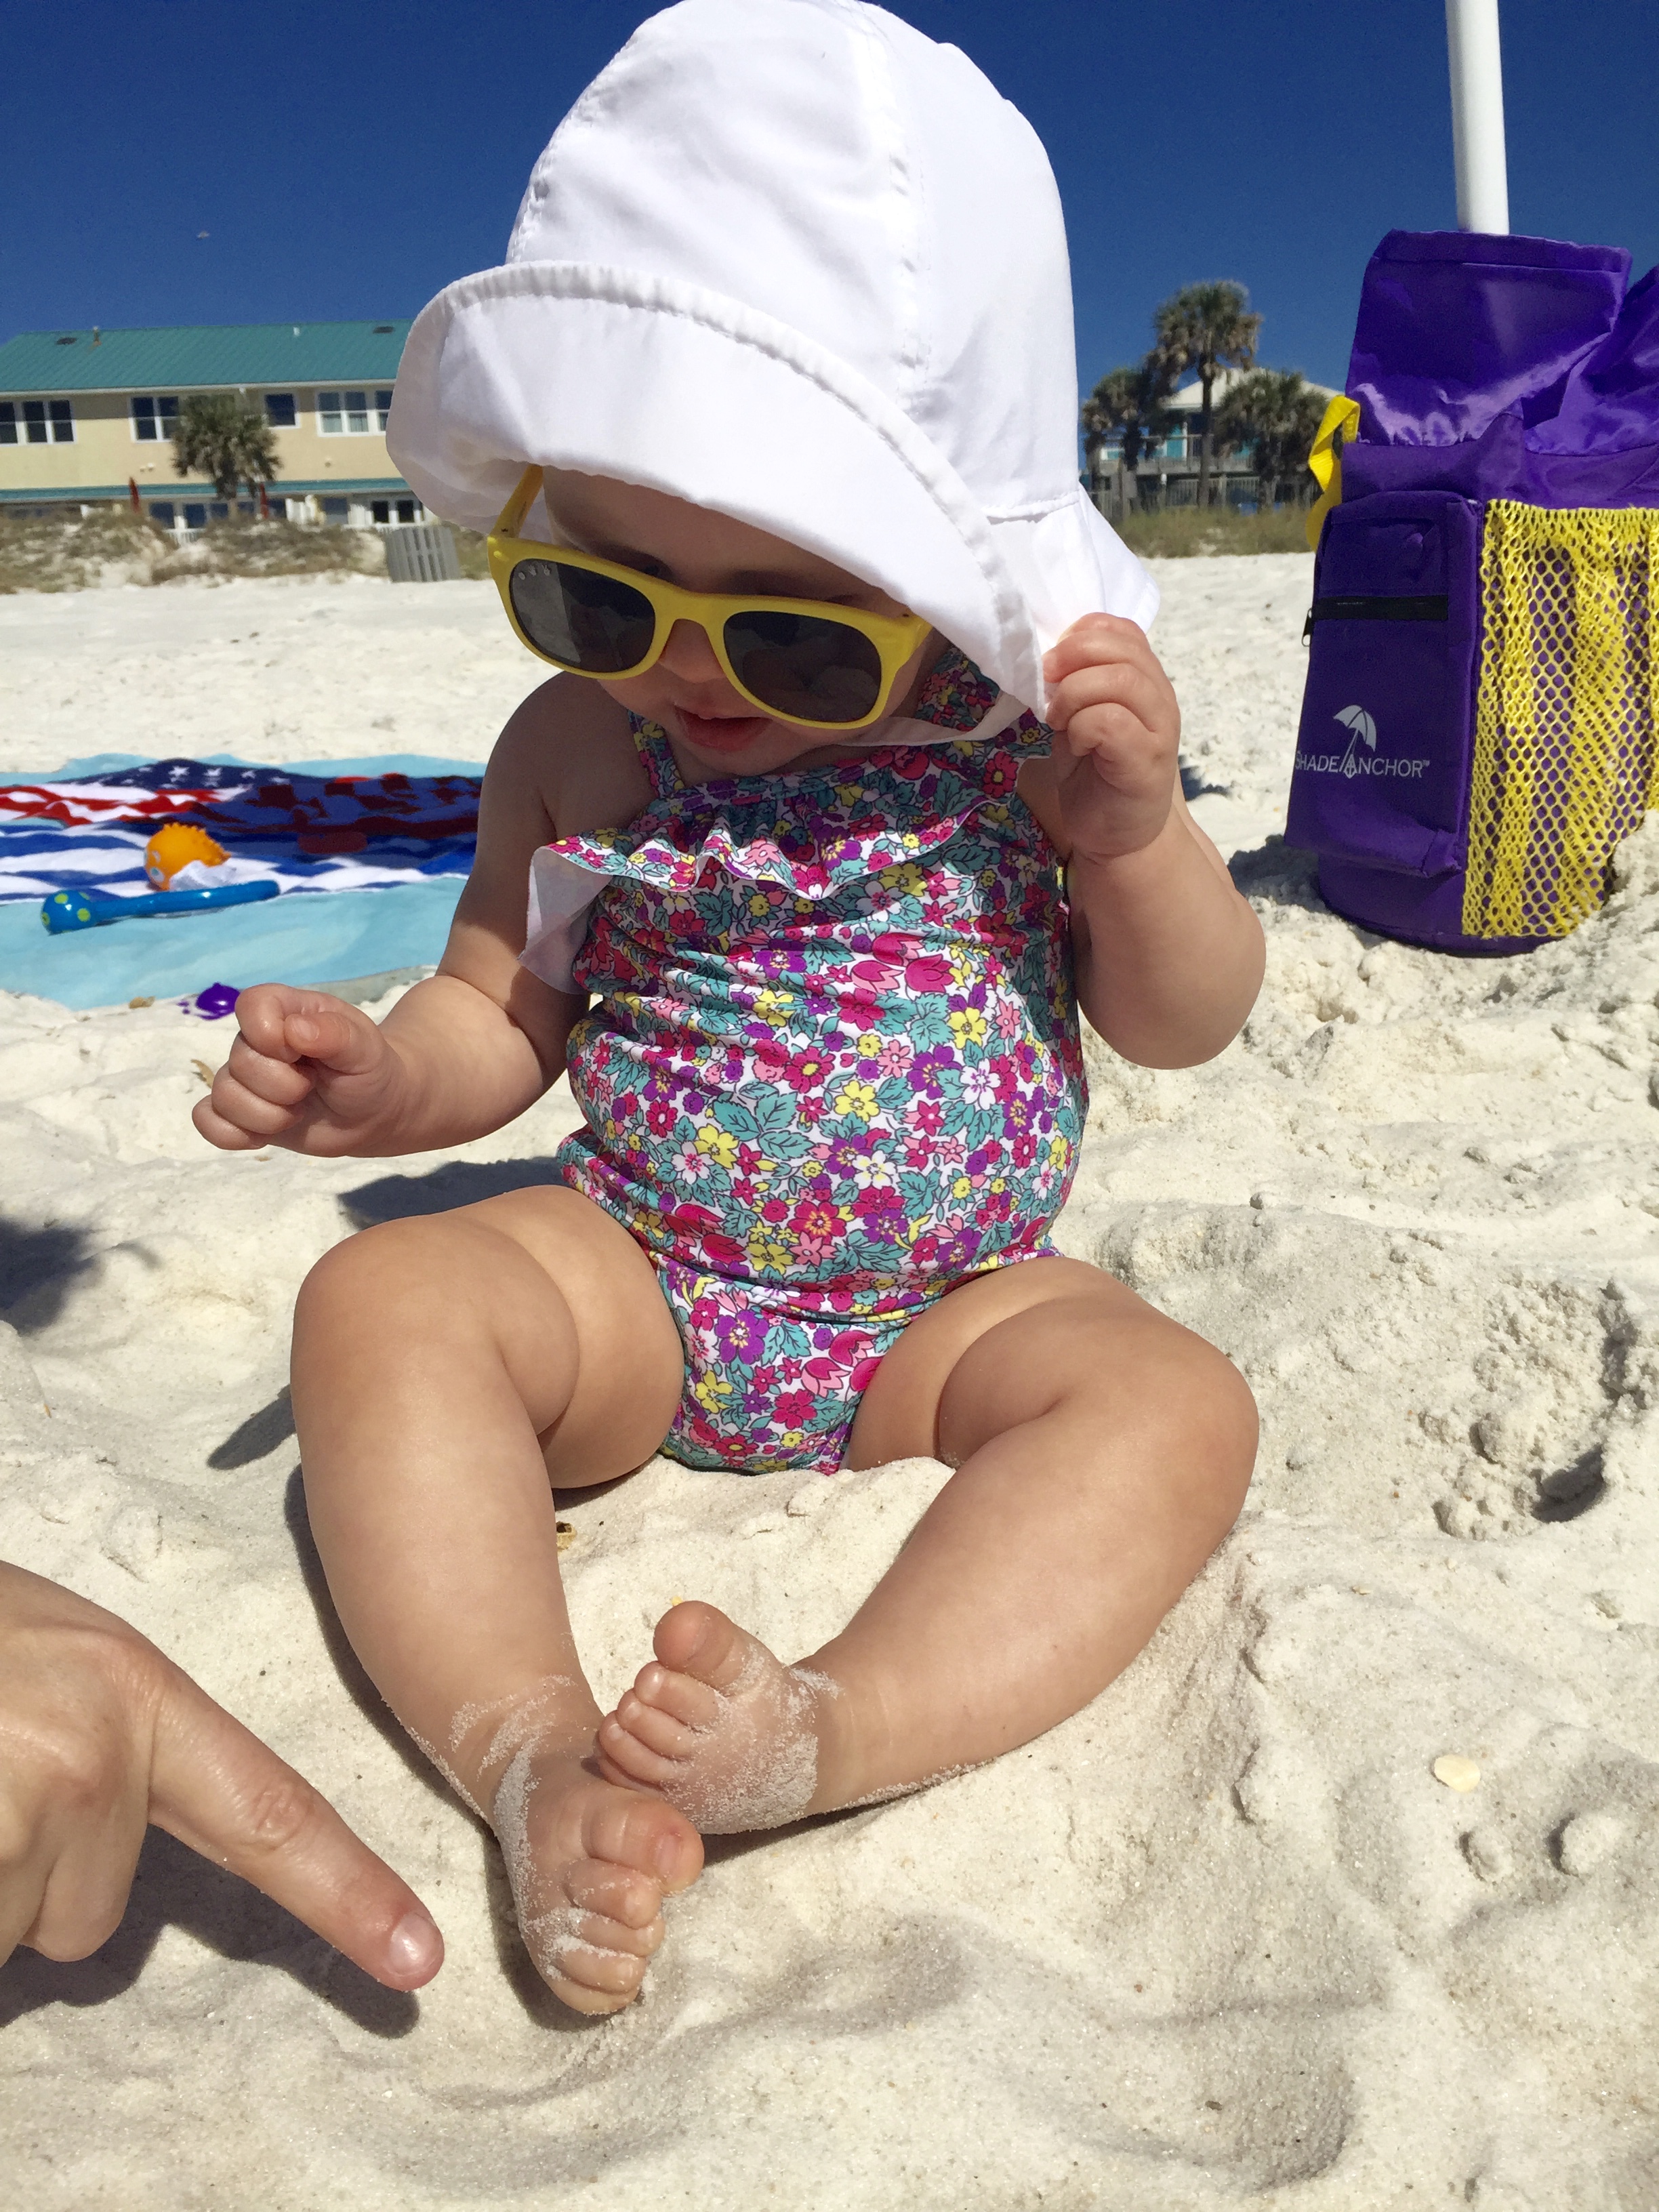 Check out these tips for taking baby to the beach!